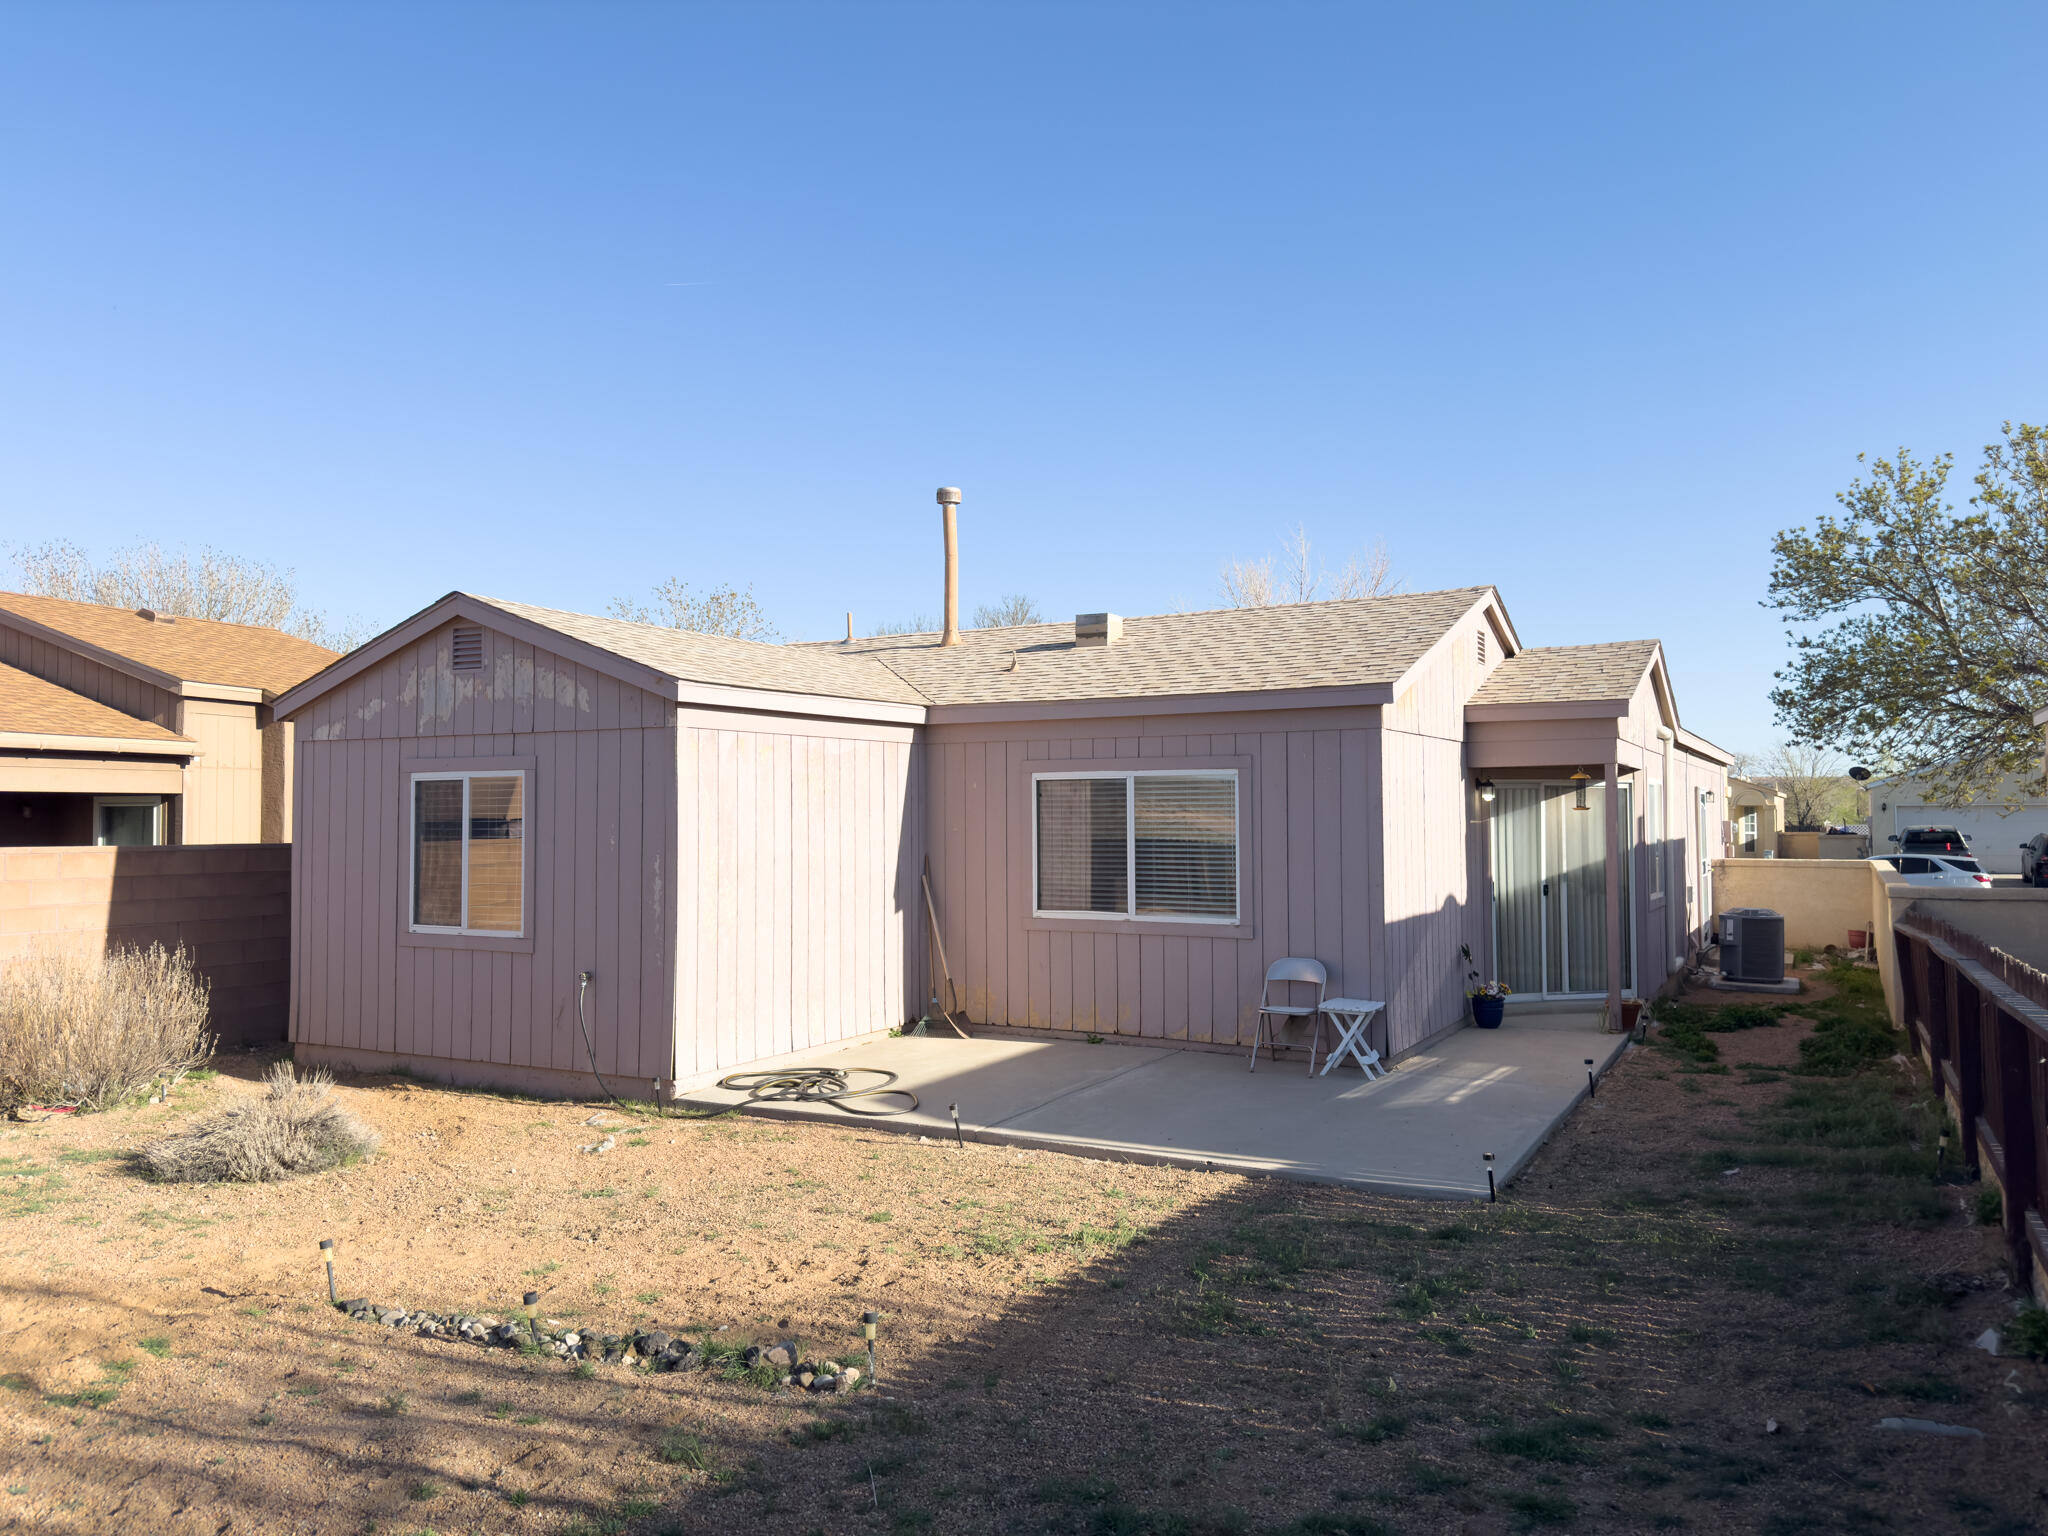 1960 Strawberry Drive NE, Rio Rancho, New Mexico 87144, 2 Bedrooms Bedrooms, ,1 BathroomBathrooms,Residential,For Sale,1960 Strawberry Drive NE,1060906